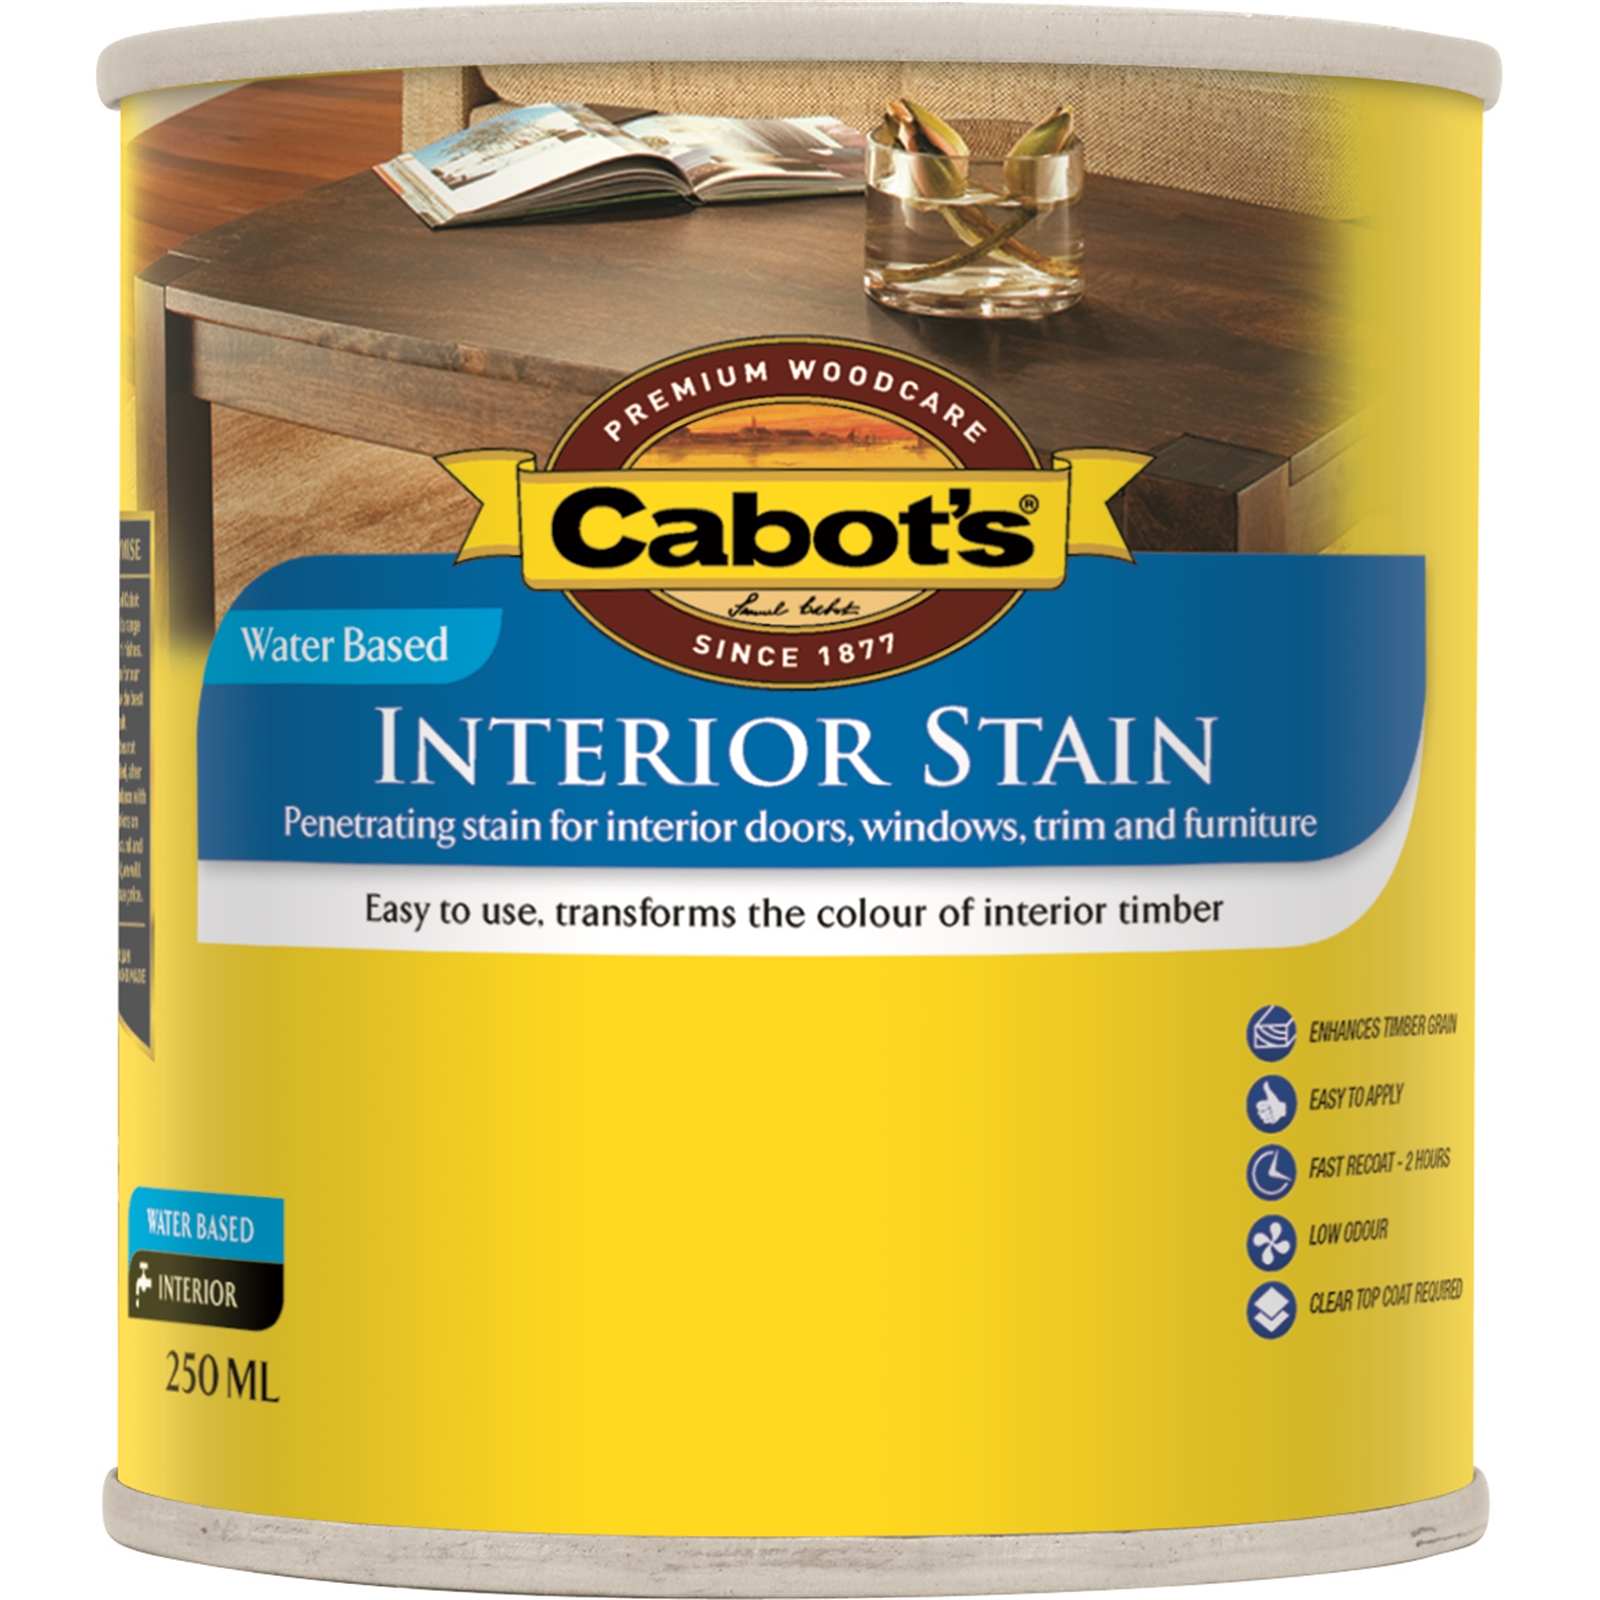 Cabot's 1L Walnut Water Based Interior Stain